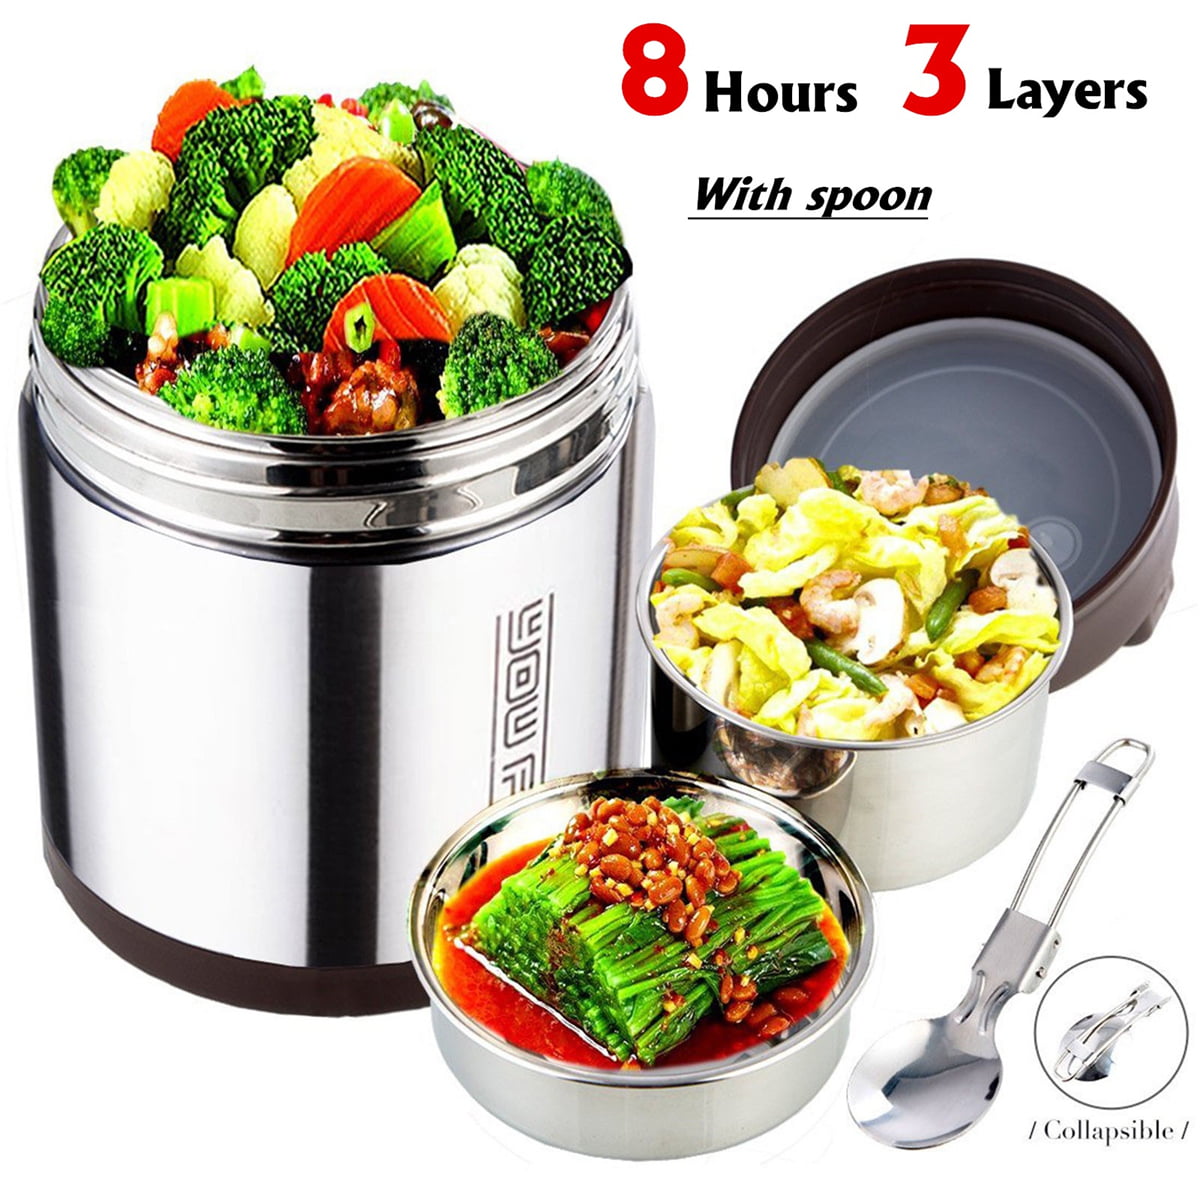 3 Tier Round Stainless Steel Thermal Insulated Lunch Box Bento Food Container 